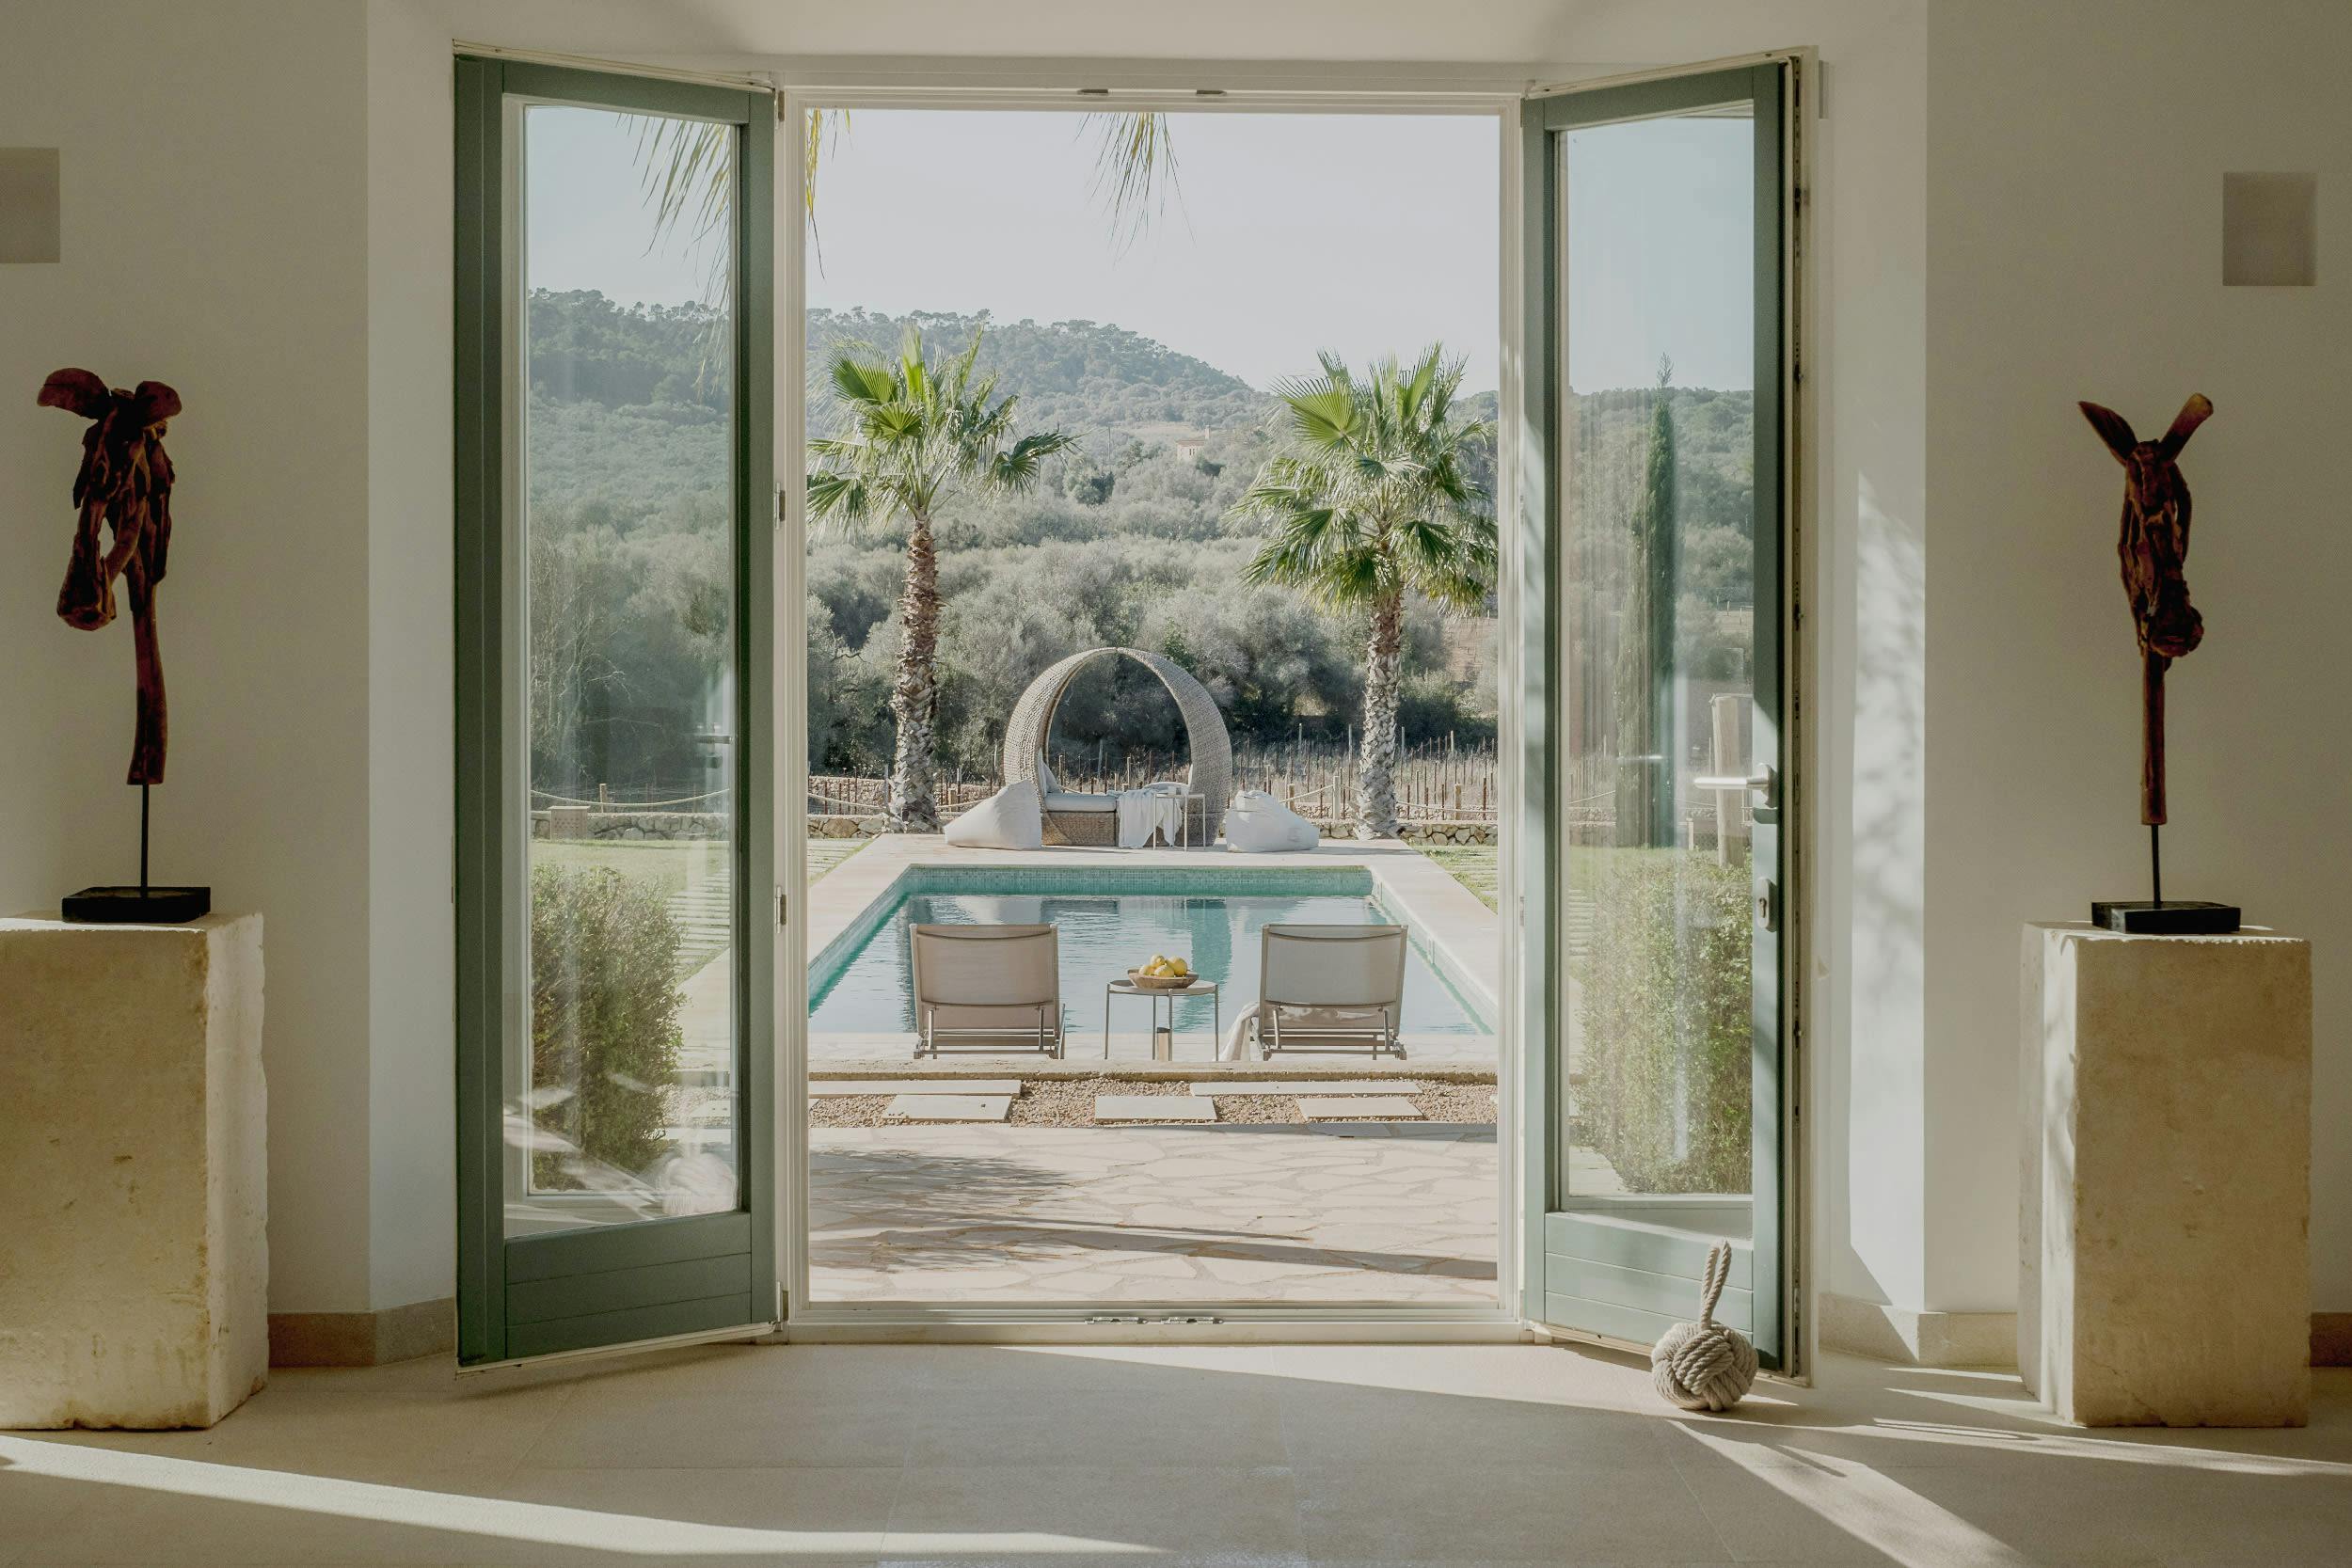 The image features a large glass door leading to a pool area, with a pool in the background.